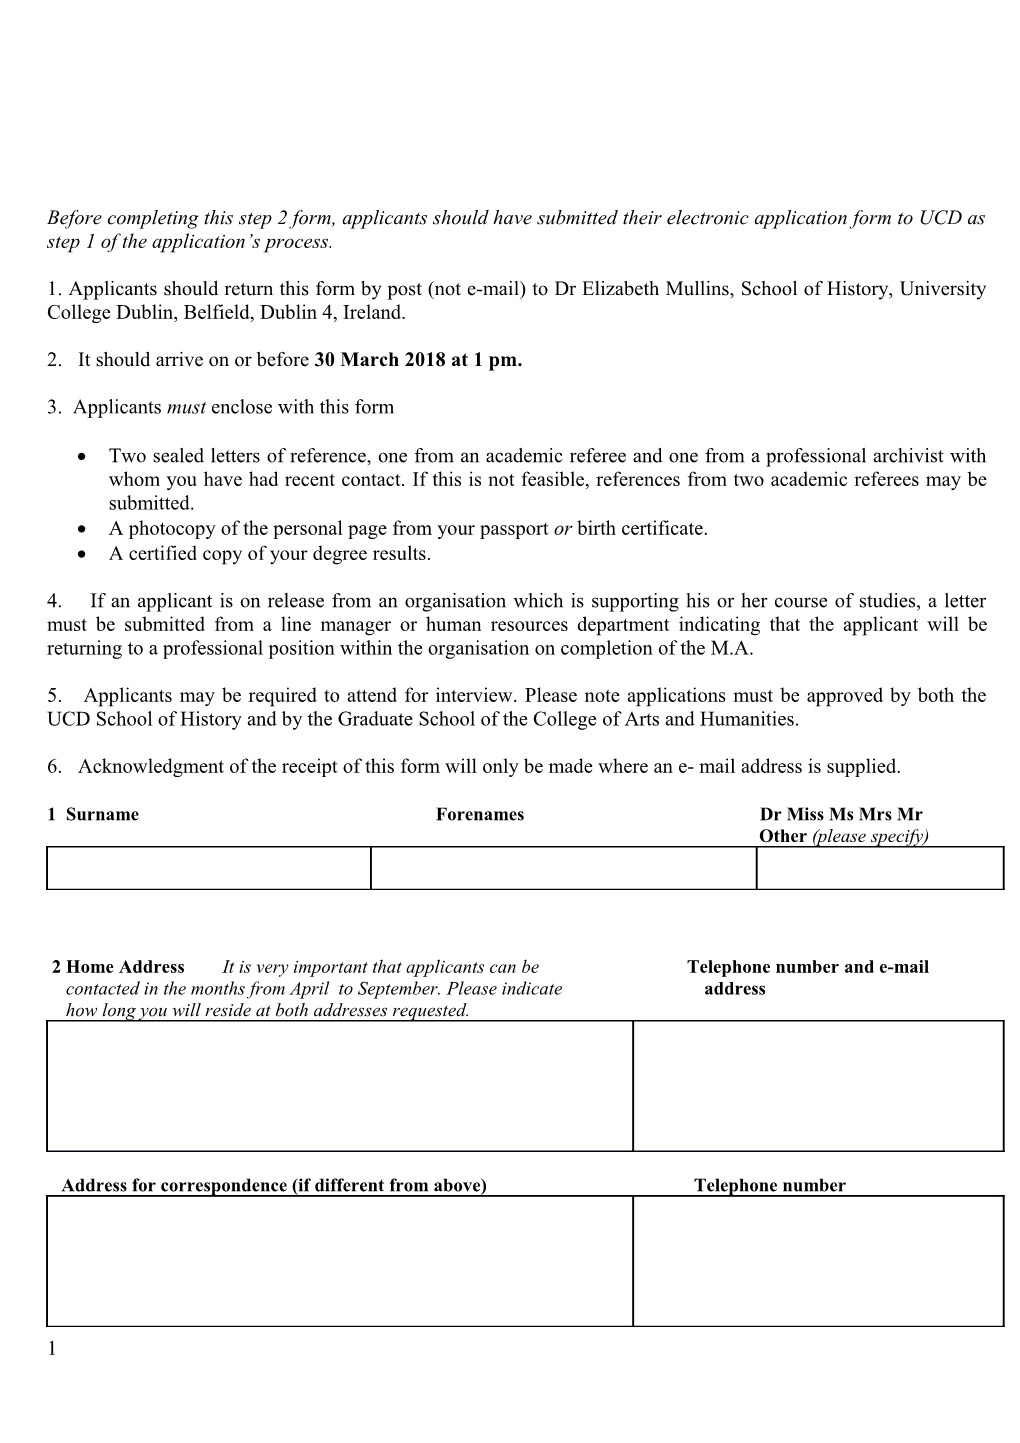 3. Applicants Must Enclose with This Form